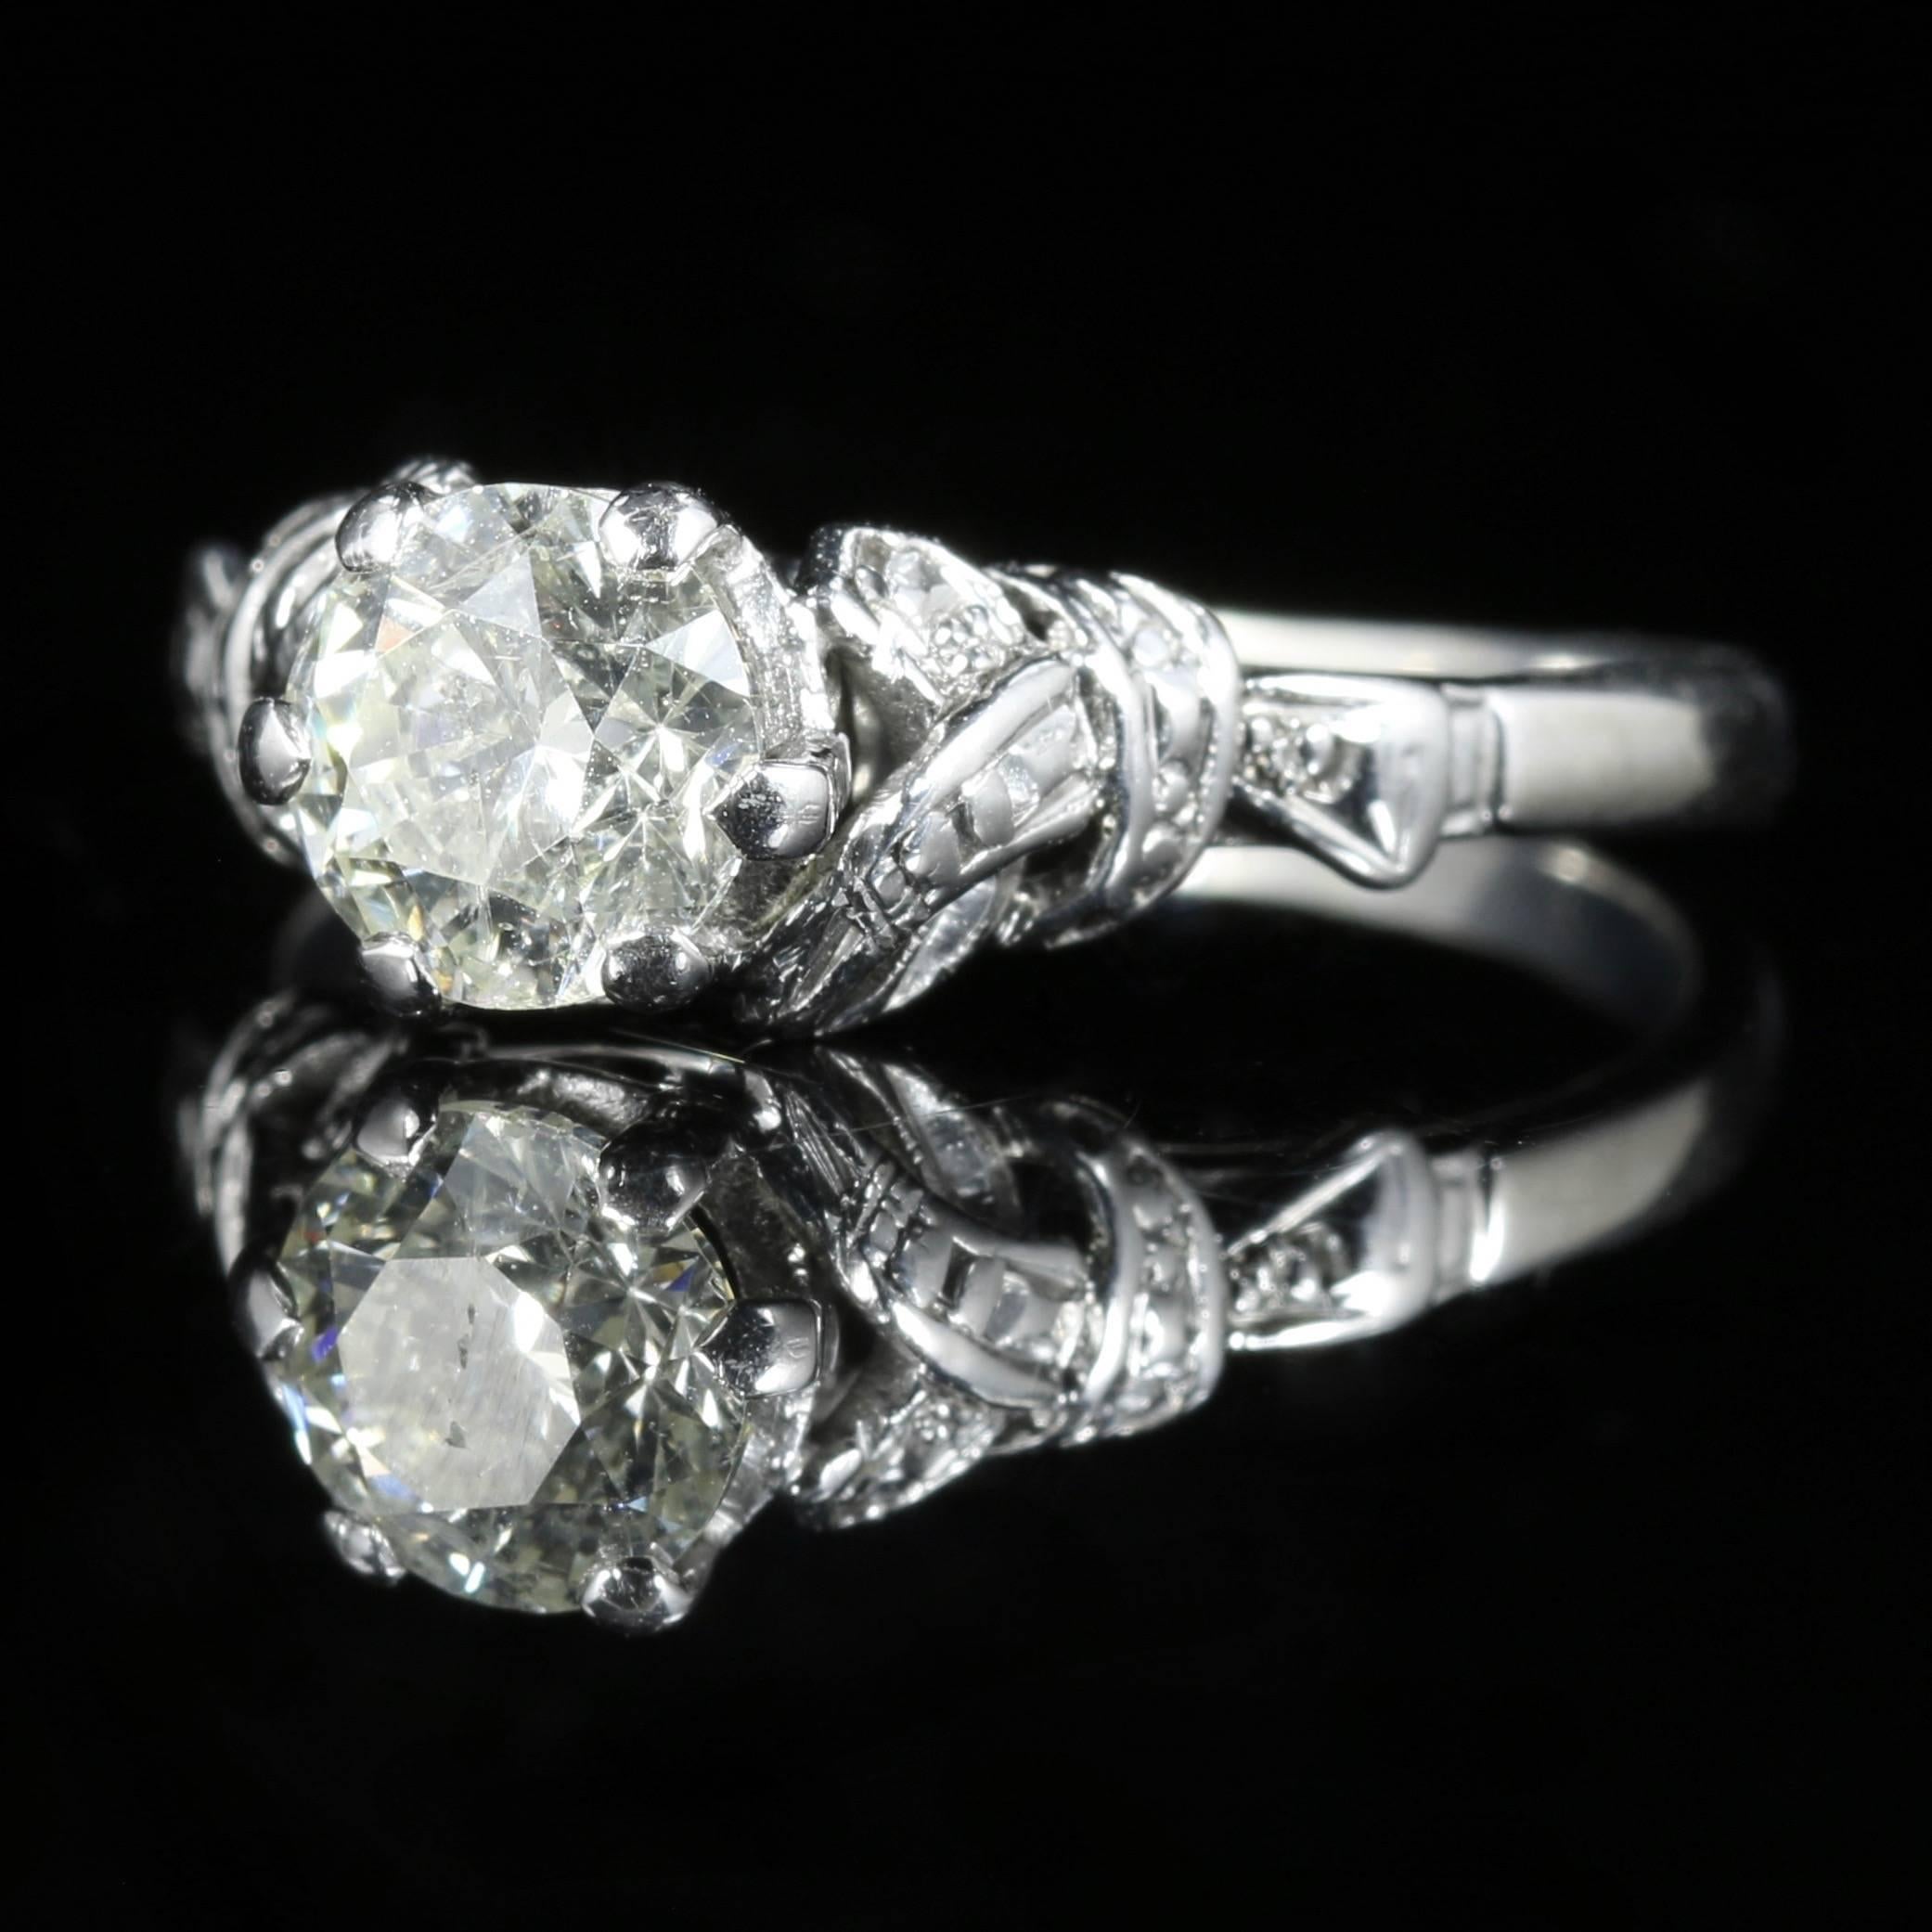 This beautiful Antique Edwardian Diamond solitaire ring is set in platinum. 

Circa 1915.

Boasting a 0.80ct old cut Diamond which is SI2 I/J Colour.

The diamond sparkles continuously and beautifully captivating the allure of natures